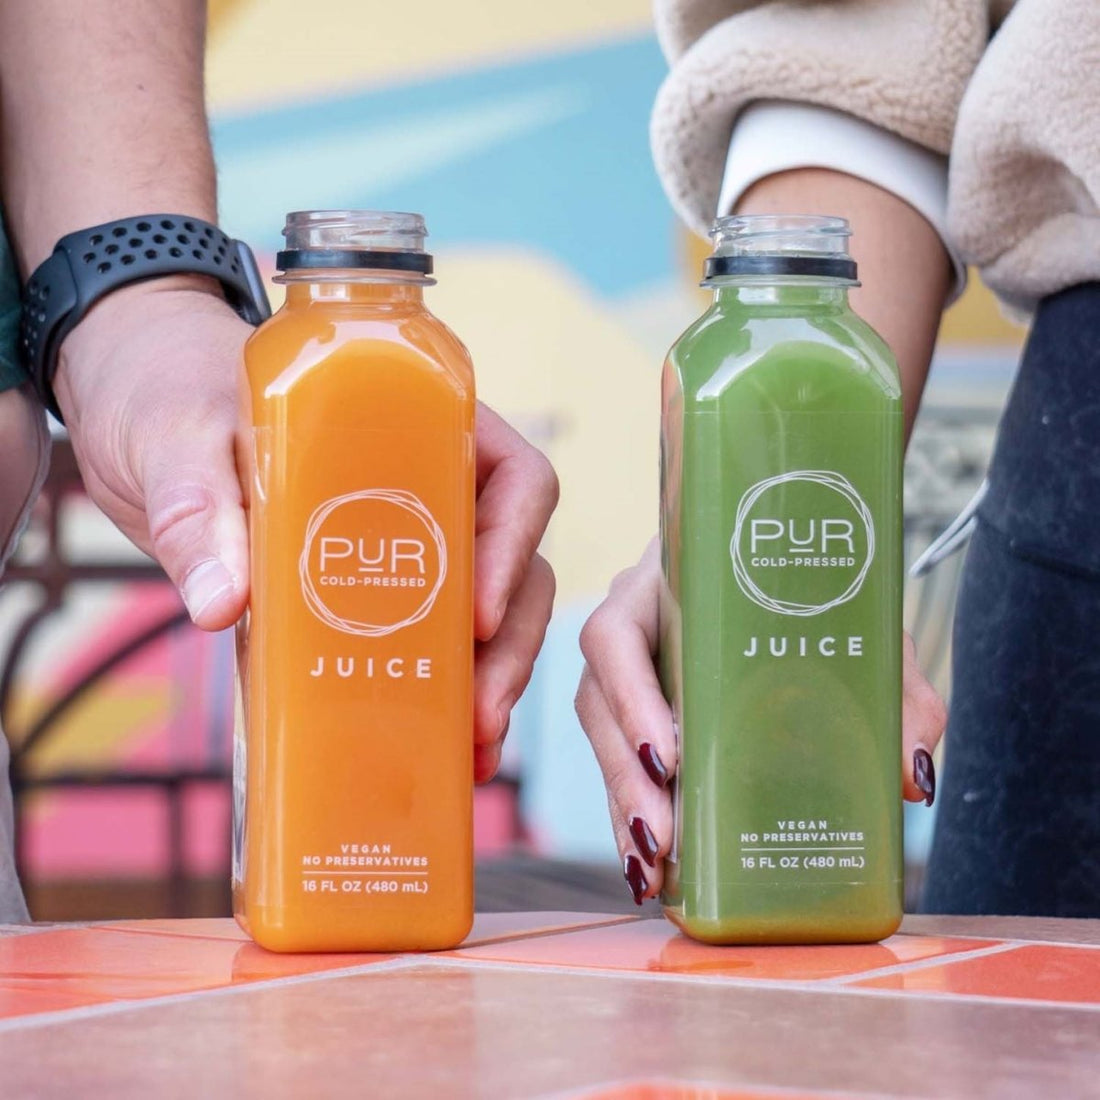 Find Out How To Get Extra Protein While Juicing - PUR Cold Pressed Juice